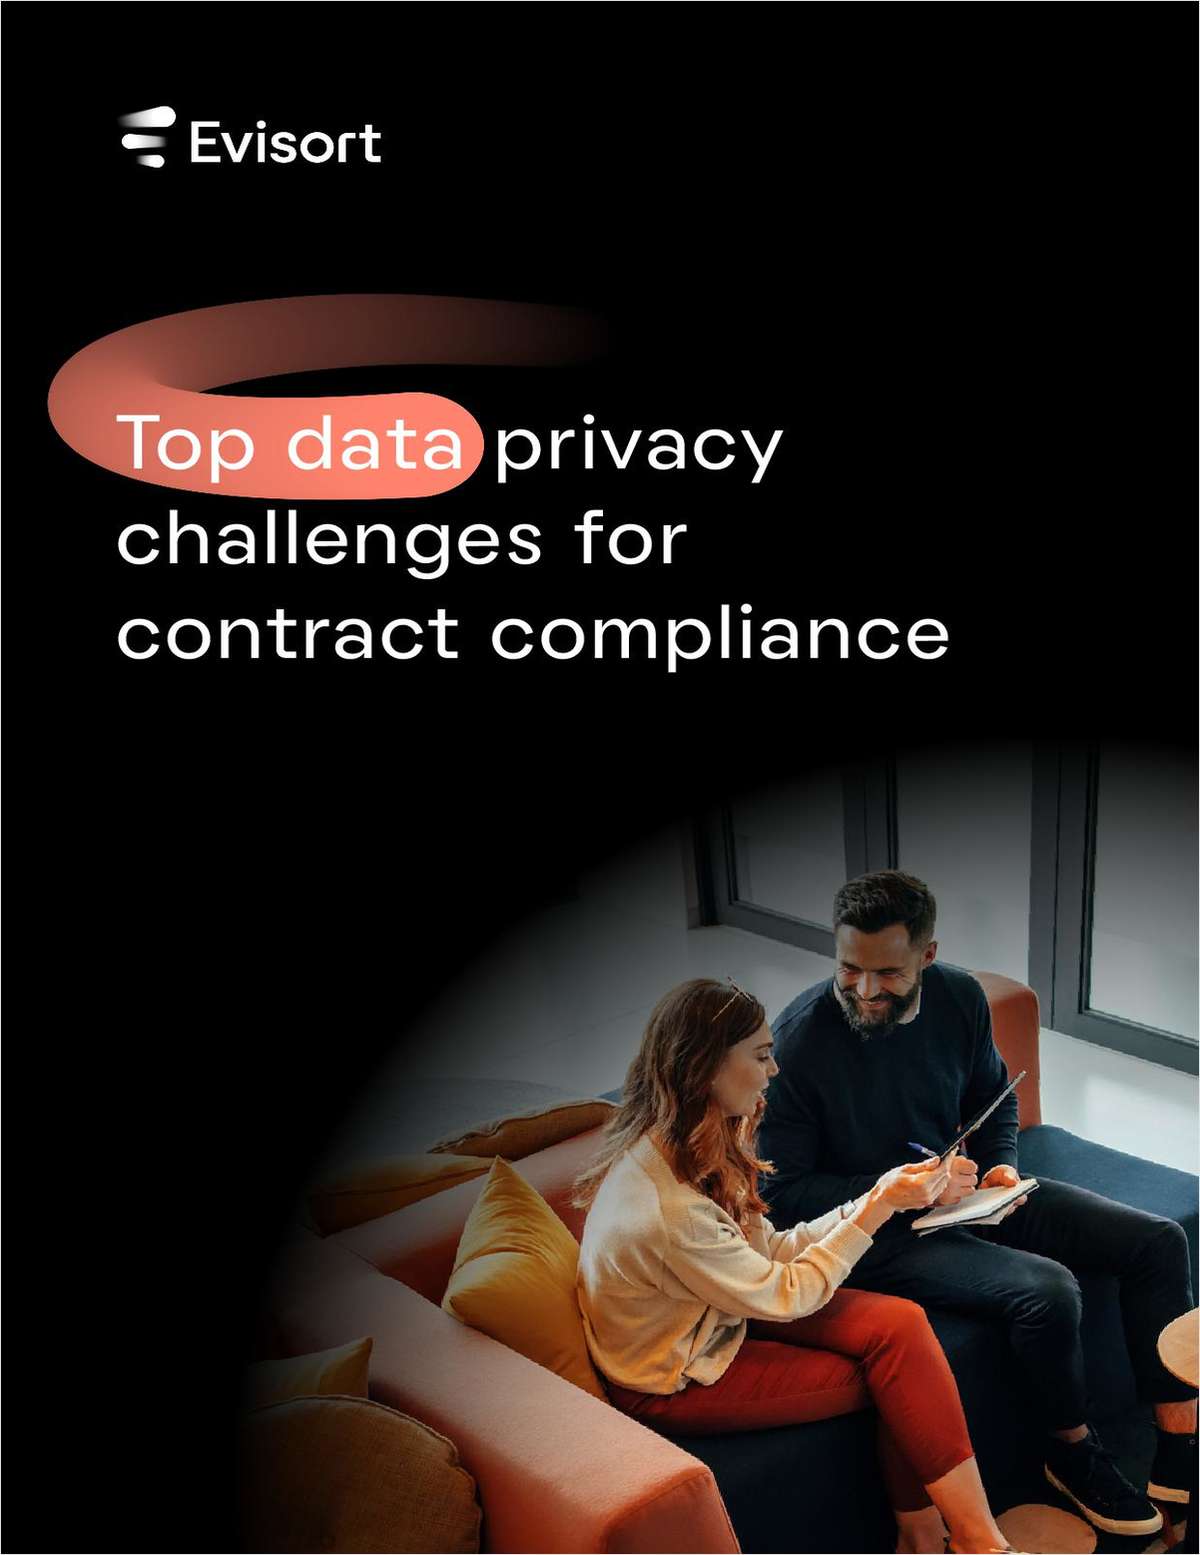 80% of companies updated their privacy policies multiple times in one year from 2020 to 2021. How can your compliance and legal teams thoroughly address the top compliance challenges while avoiding the unfortunate label of “bottleneck?” Download this white paper to learn how to accomplish this today.